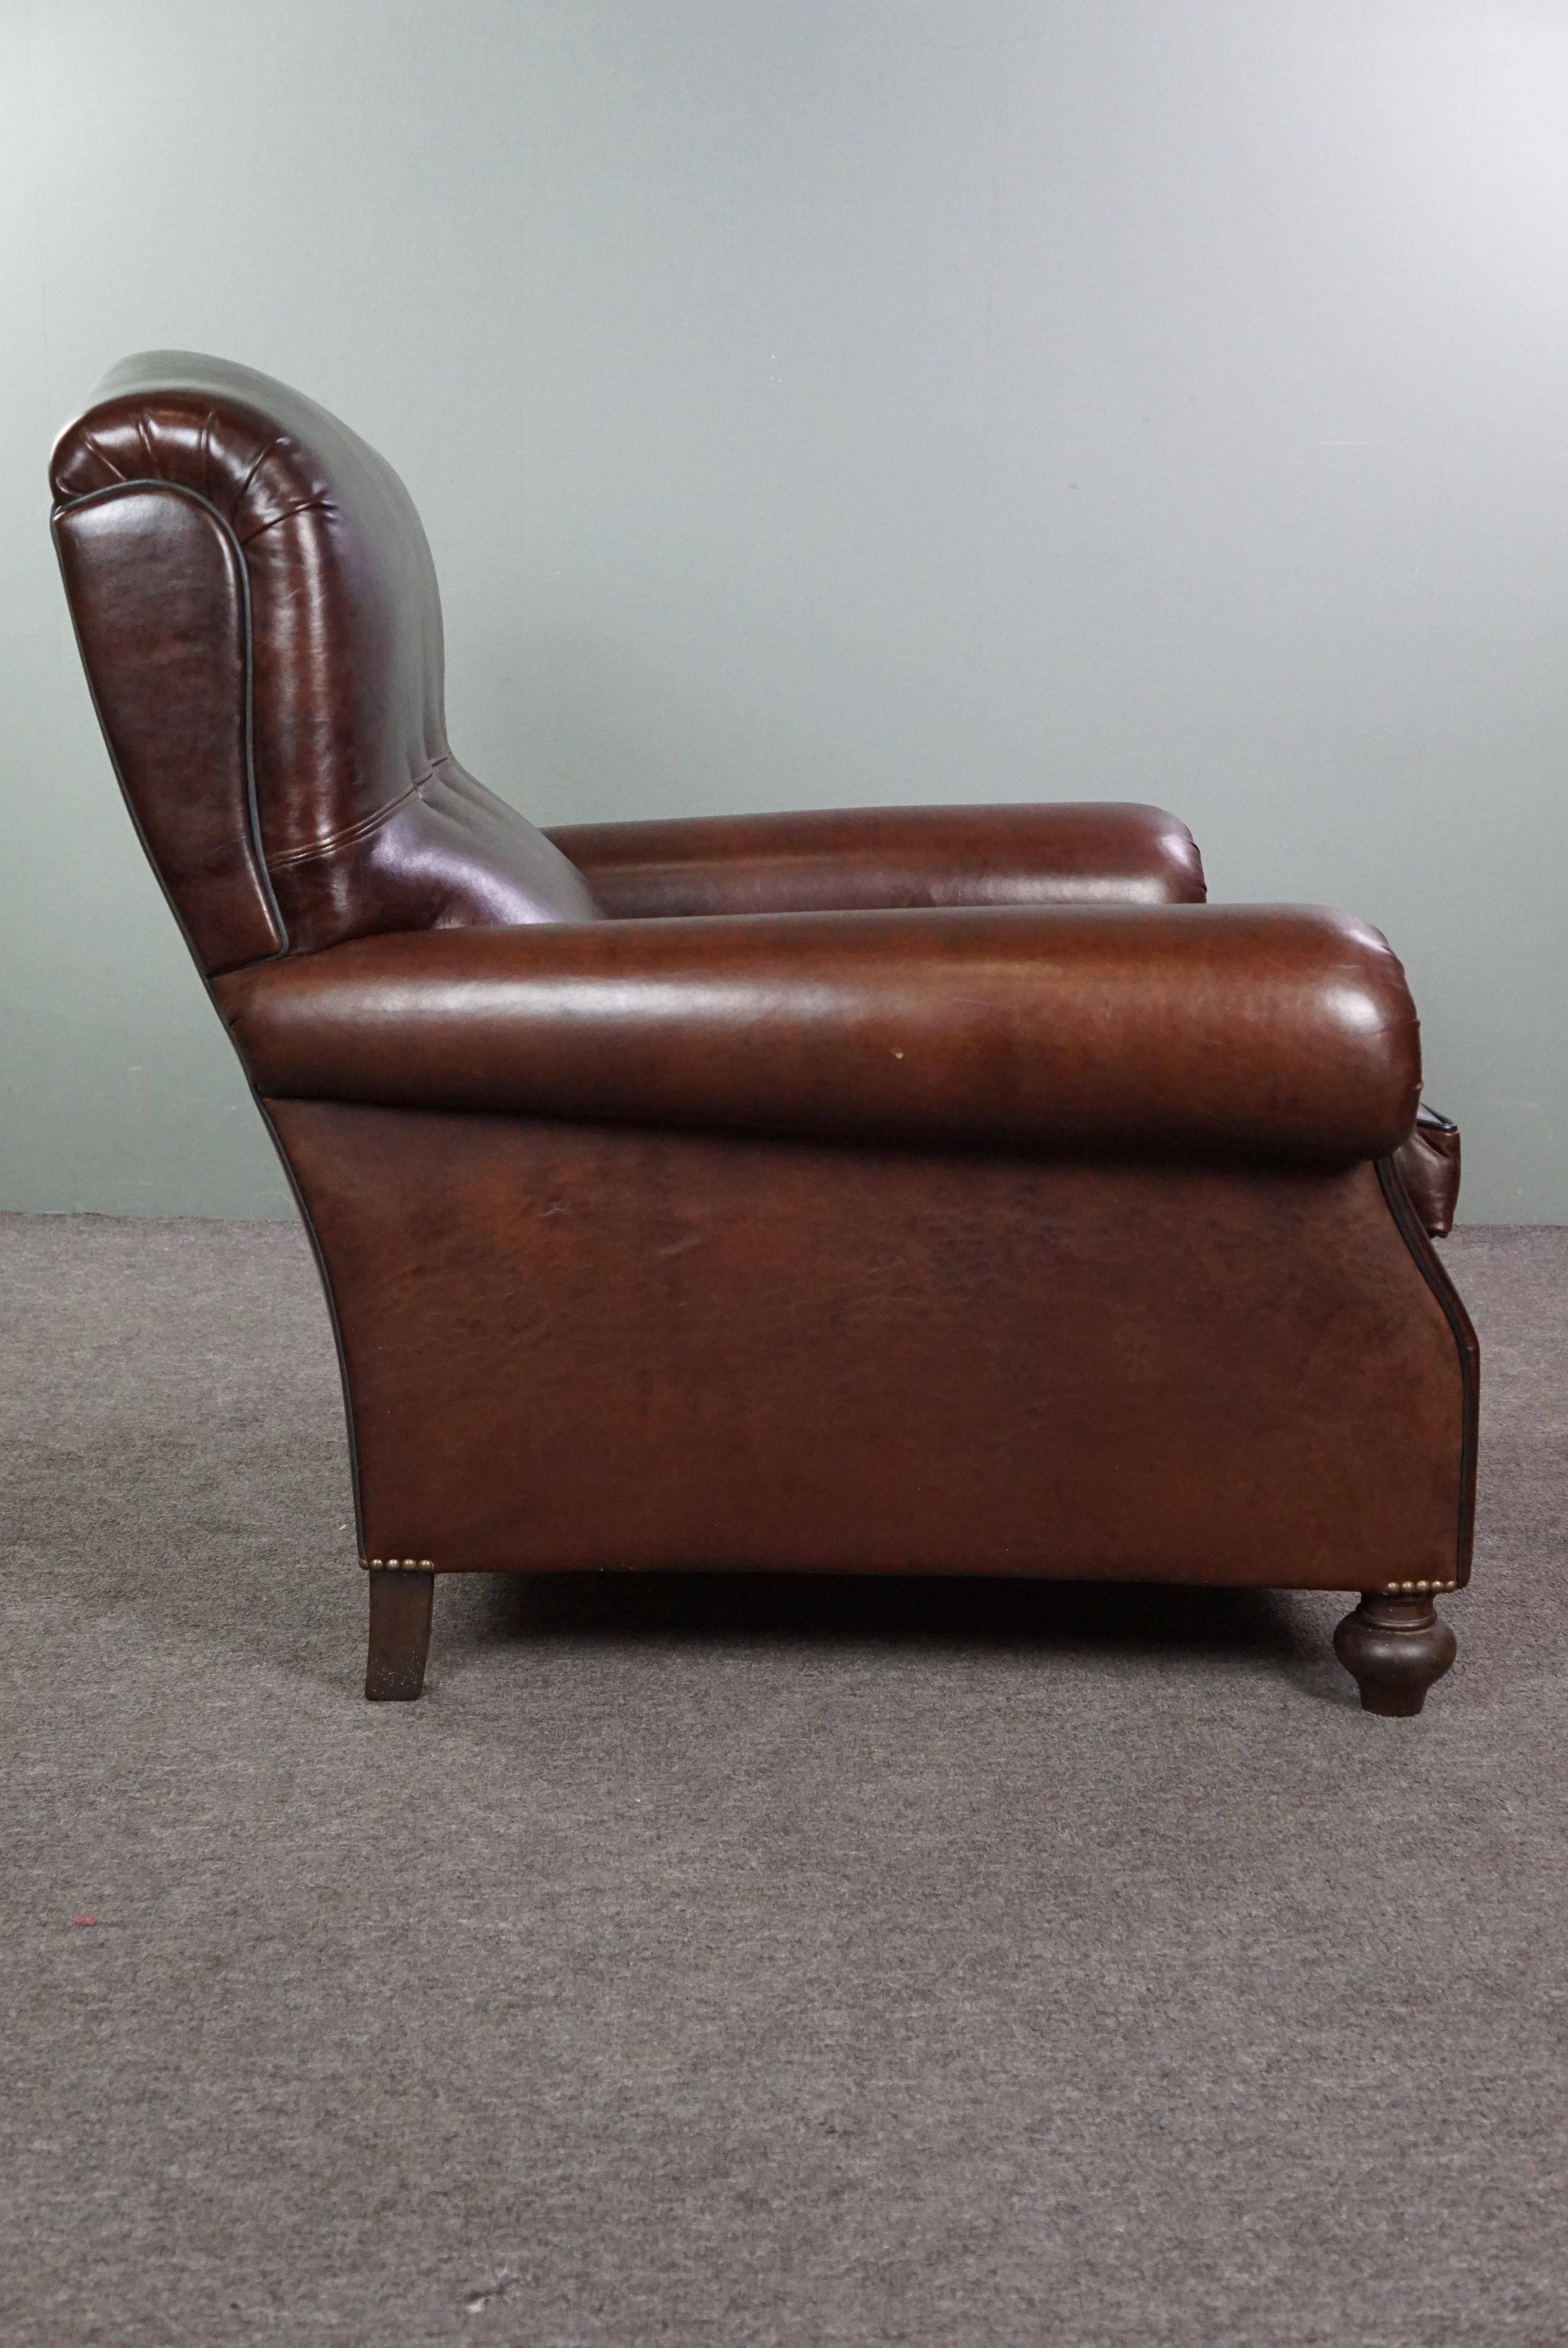 Recently reupholstered old English armchair in dark sheep leather color In Good Condition For Sale In Harderwijk, NL